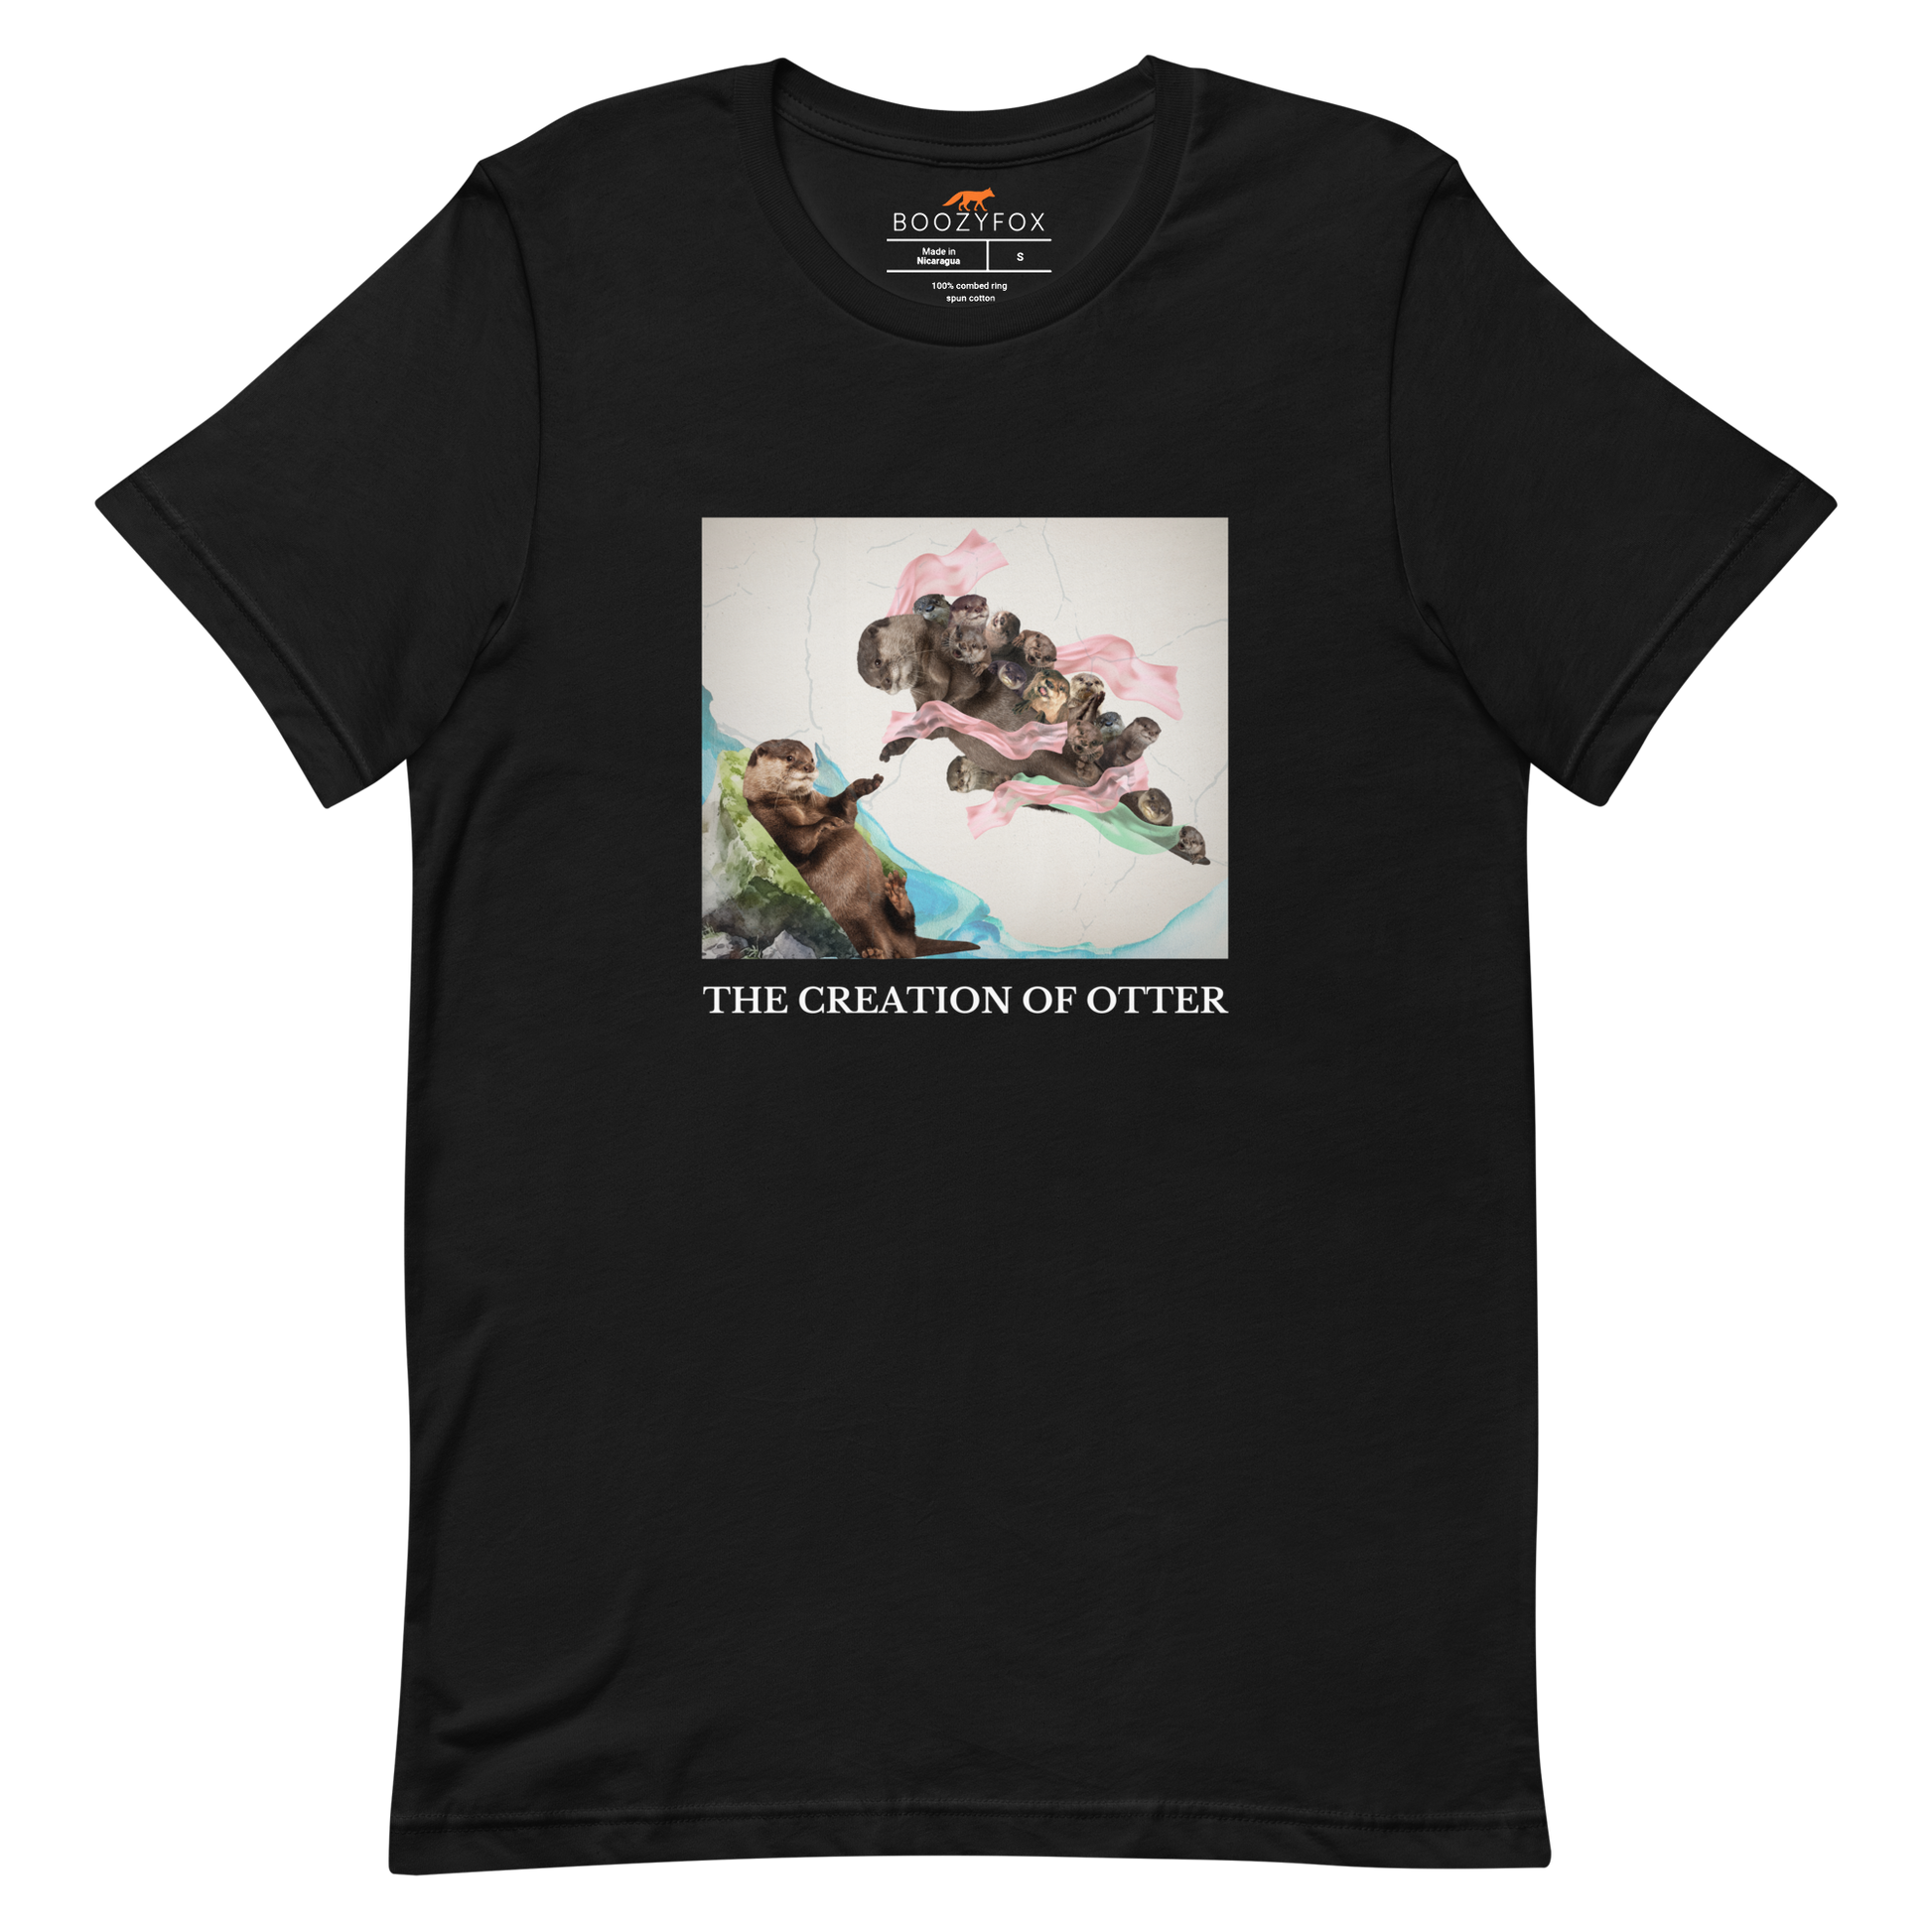 Black Premium Otter Tee featuring a playful The Creation of Otter parody of Michelangelo's masterpiece - Artsy/Funny Graphic Otter Tees - Boozy Fox